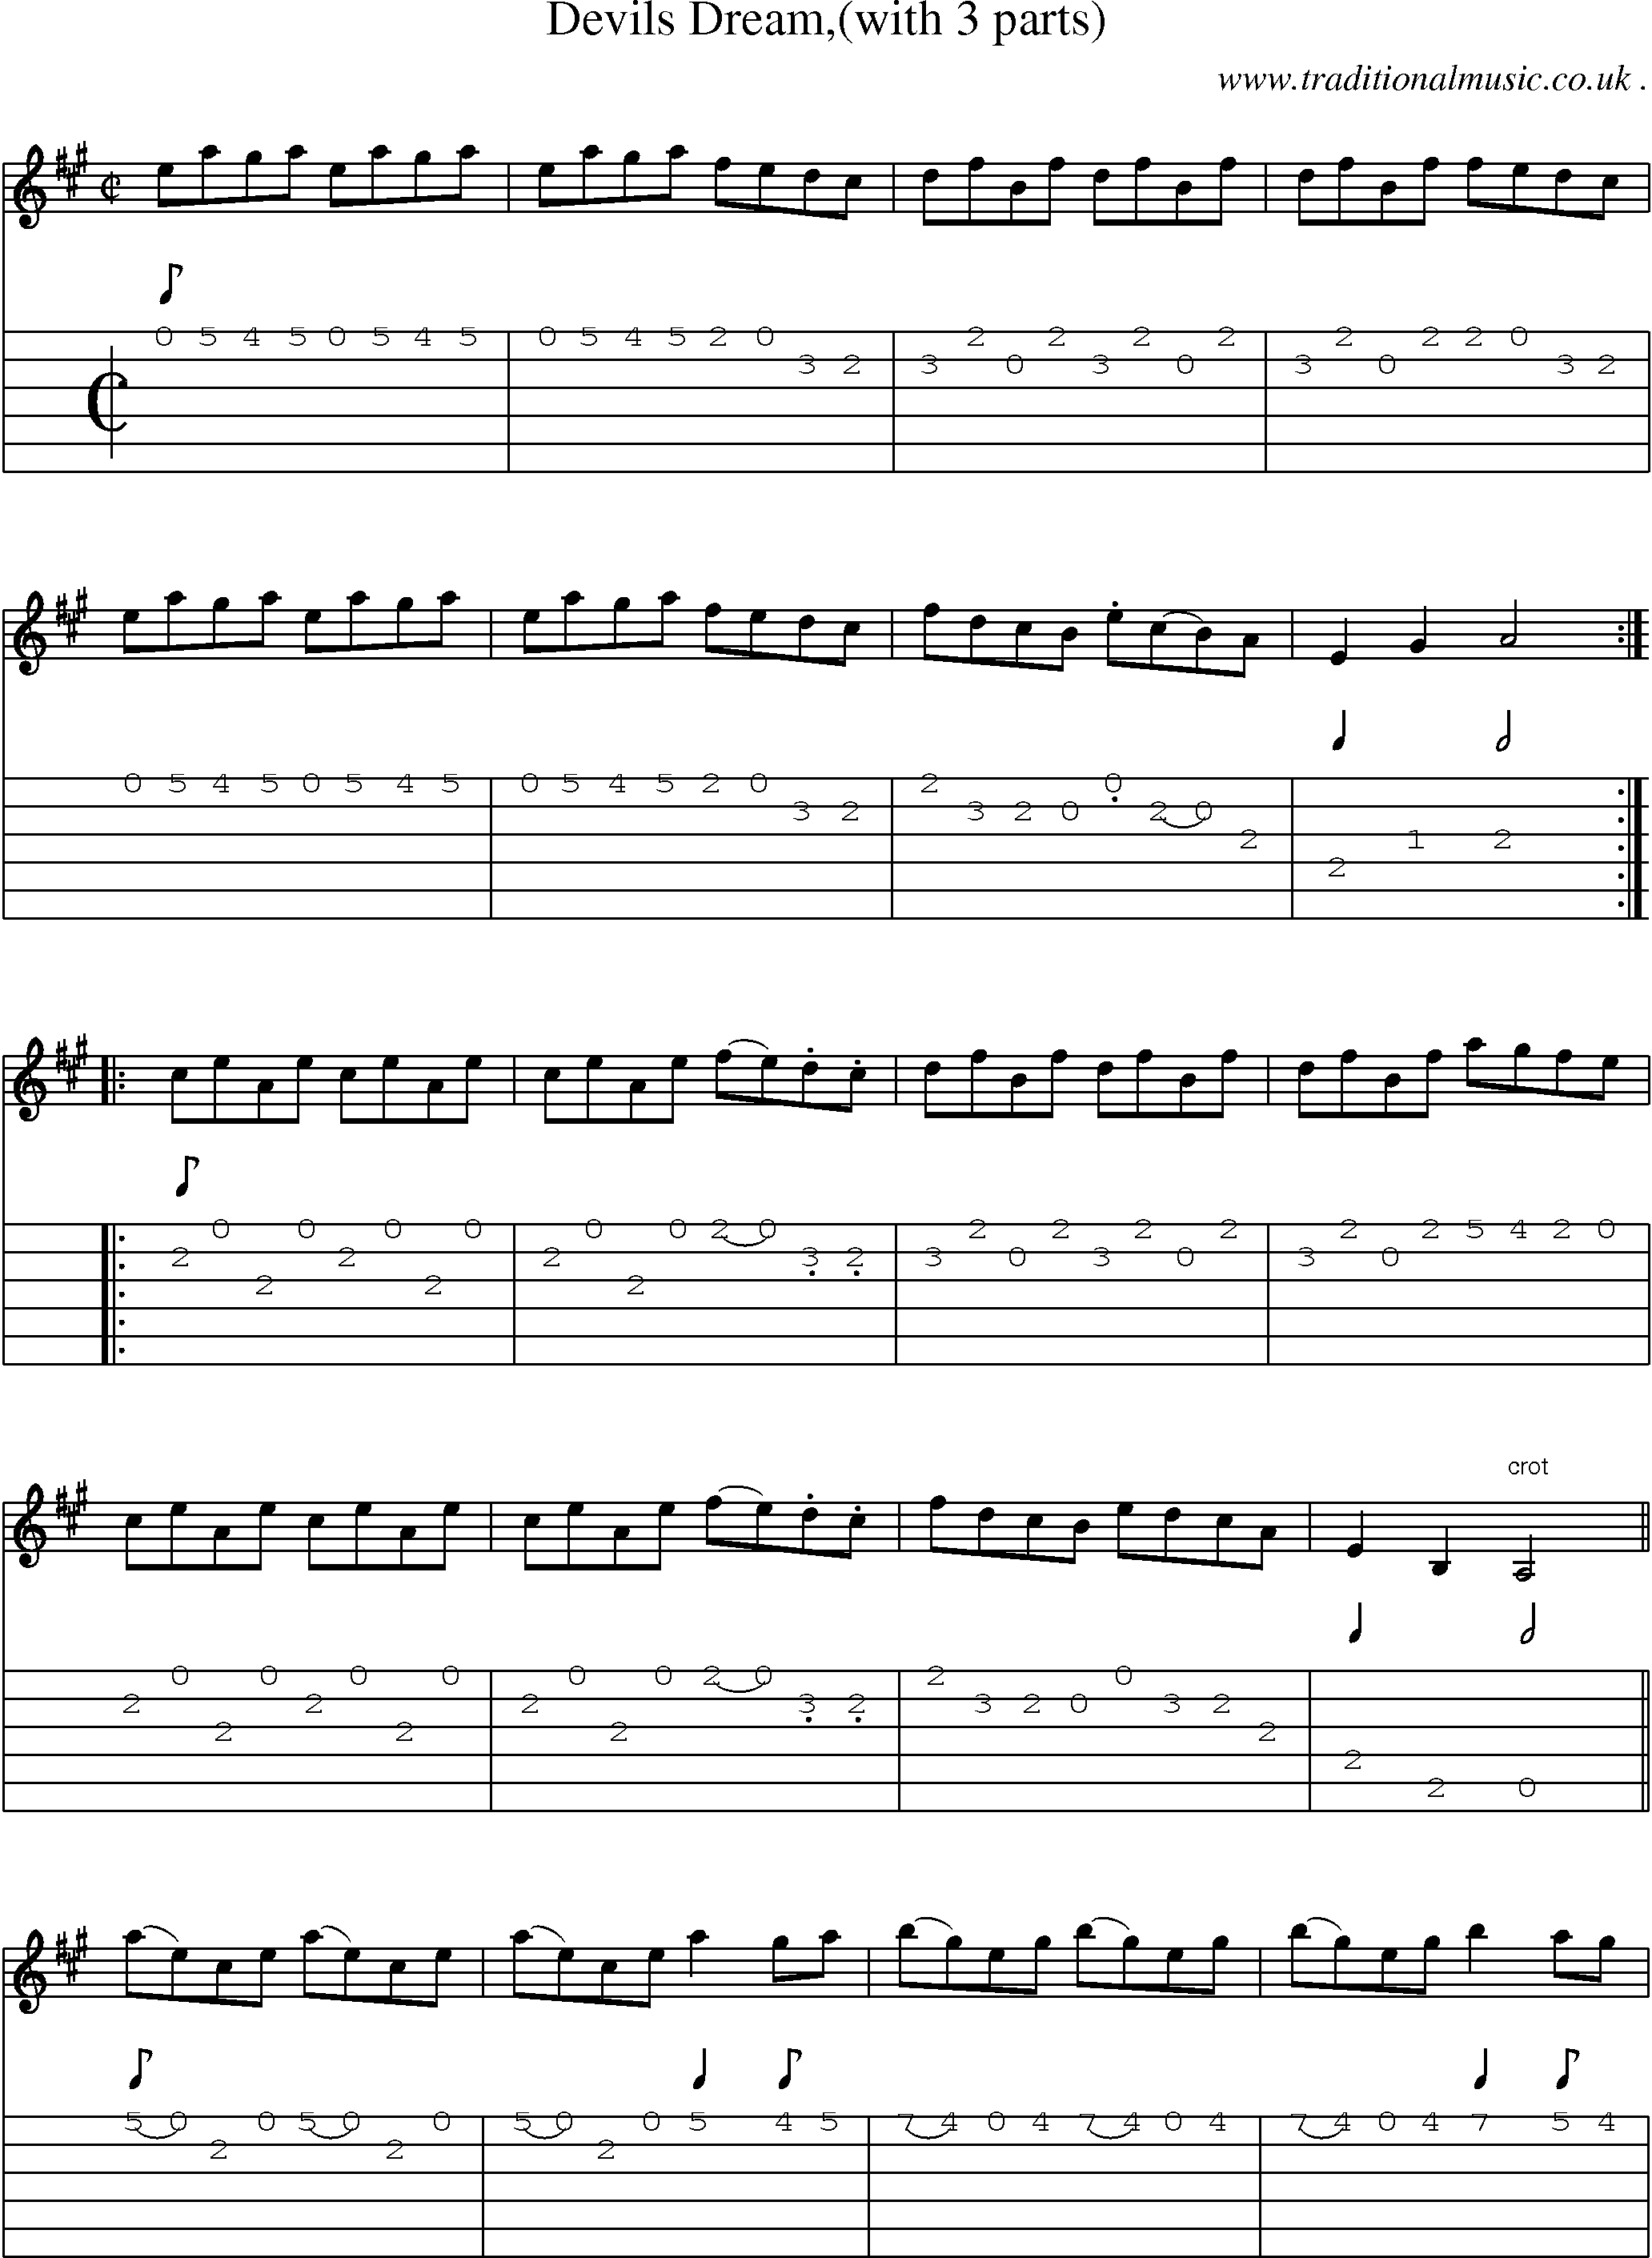 Sheet-Music and Guitar Tabs for Devils Dream(with 3 Parts)